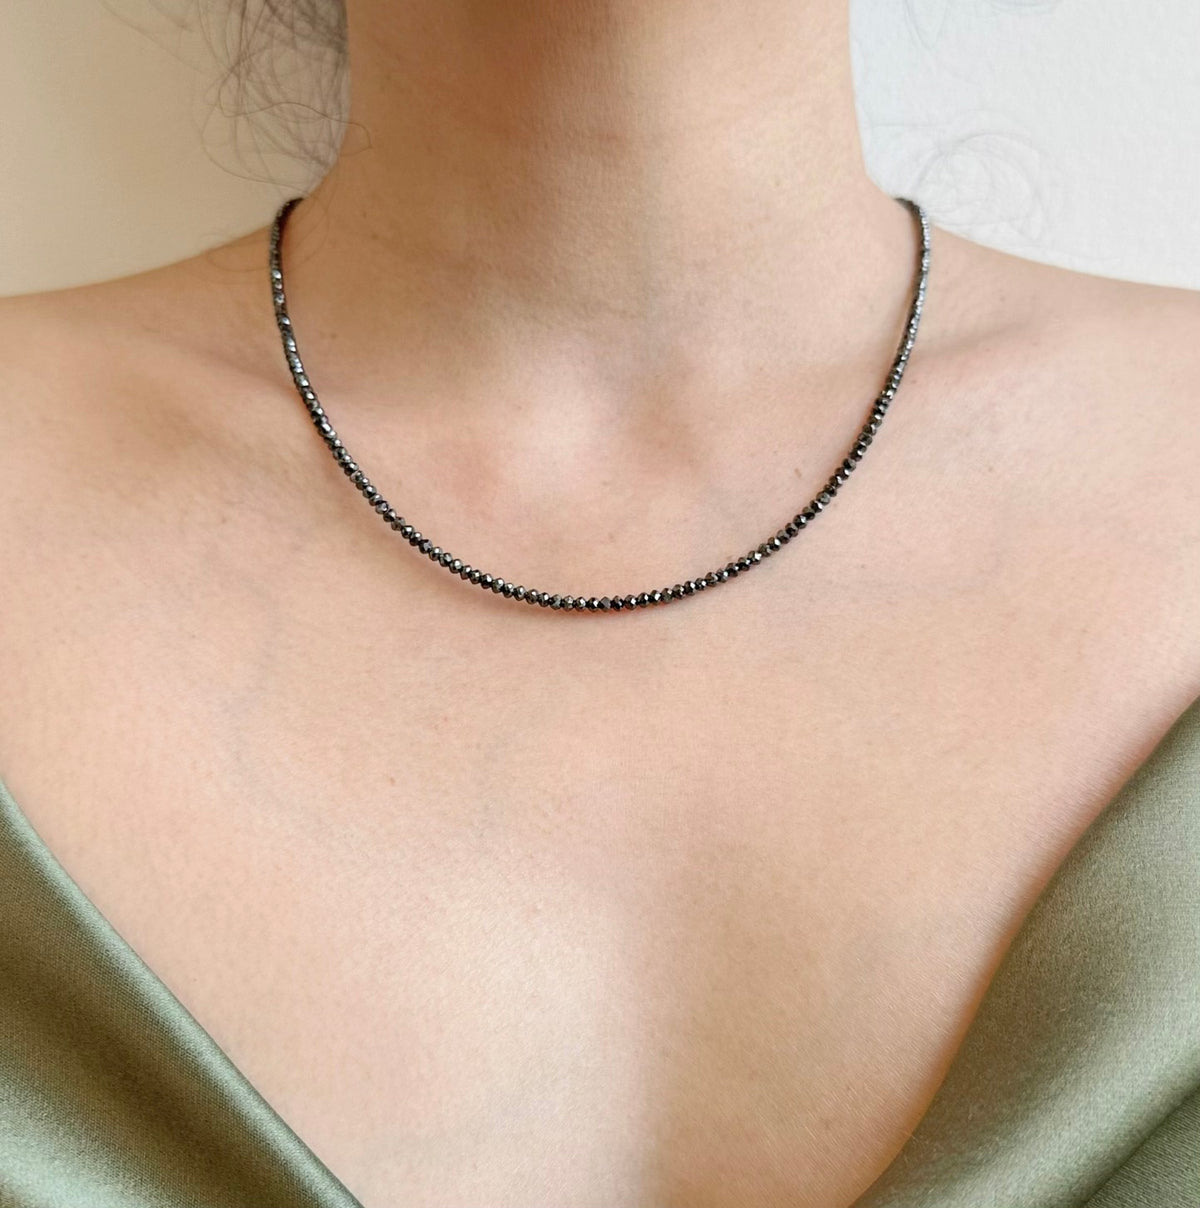 Black Diamond Necklace 18 Inches with 14K Gold Clasp